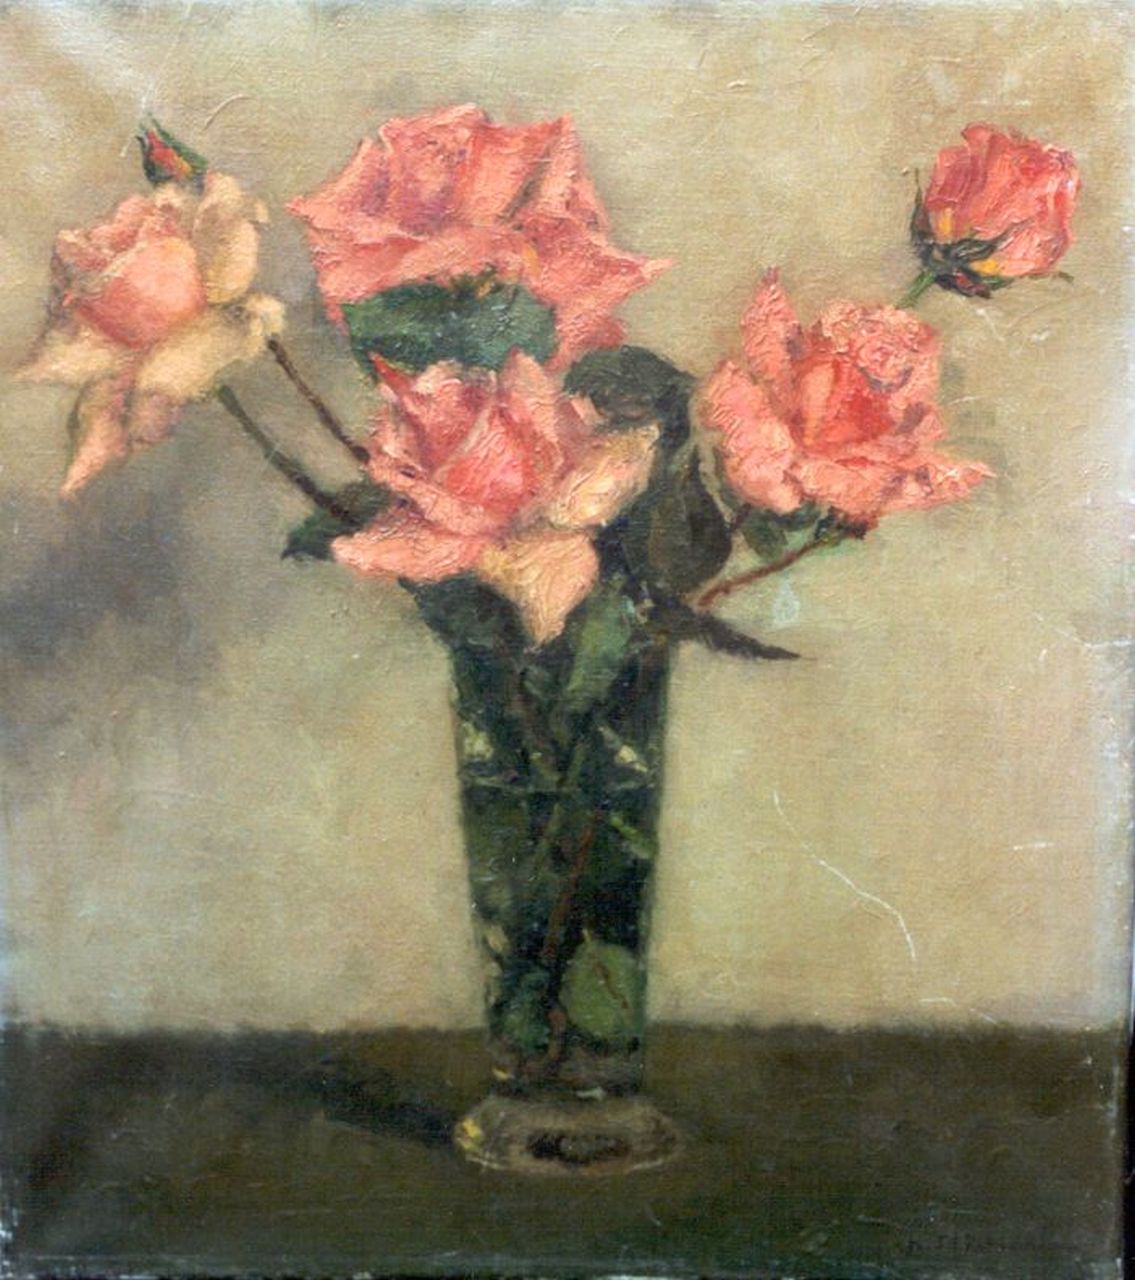 Timmering C.M.  | Cornelis Herman 'Cees' Timmering, Pink roses in a vase, Öl auf Leinwand 40,0 x 35,0 cm, signed l.r.